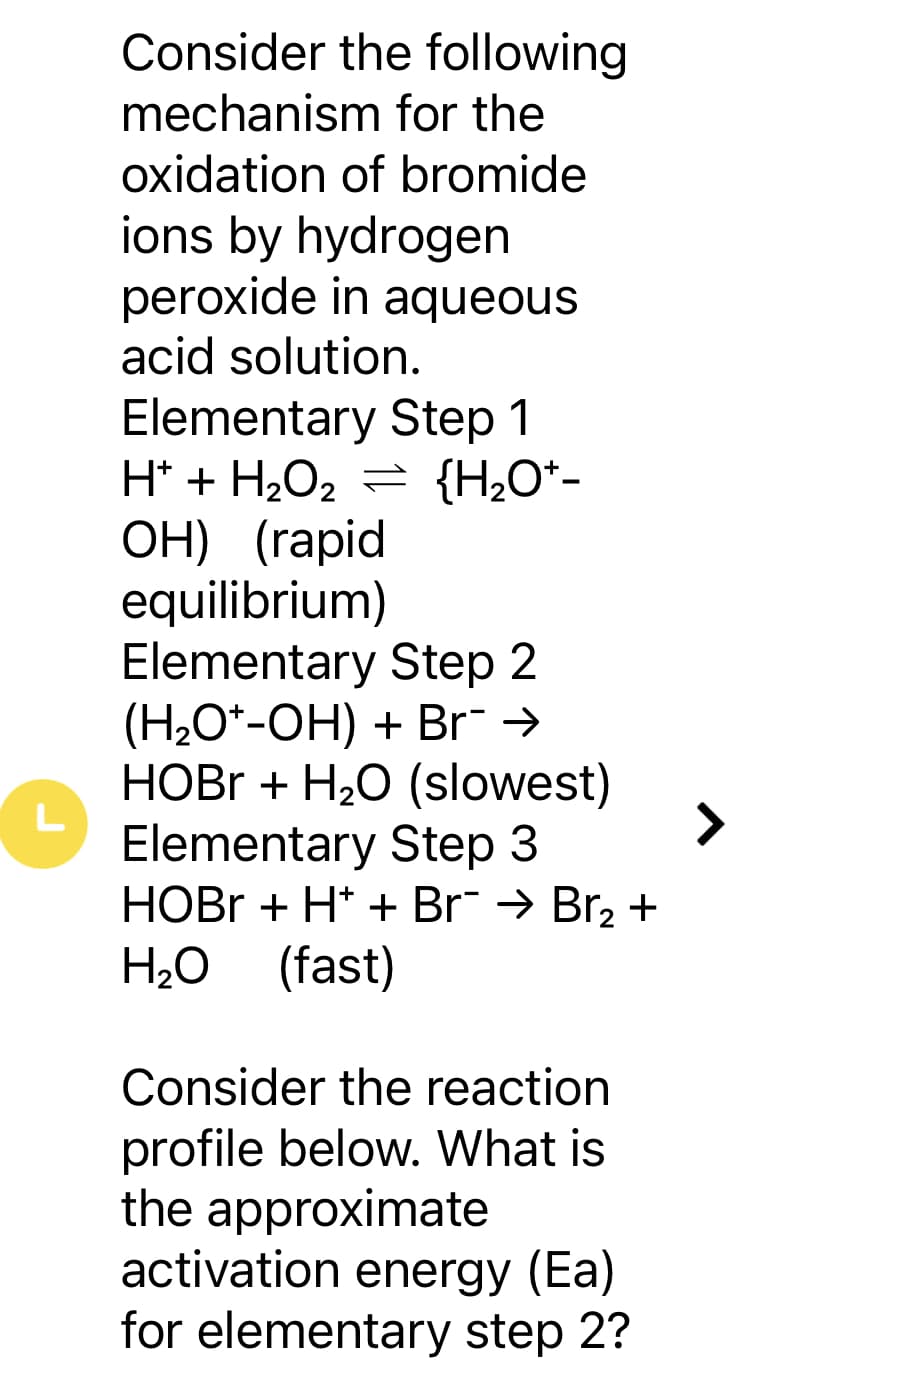 L
Consider the following
mechanism for the
oxidation of bromide
ions by hydrogen
peroxide in aqueous
acid solution.
Elementary Step 1
H+ + H₂O₂ = {H₂O*-
OH) (rapid
equilibrium)
Elementary Step 2
(H₂O*-OH) + Br¨ →
HOBr + H₂O (slowest)
Elementary Step 3
HOBr+ H+ + Br¯ → Br₂ +
H₂O (fast)
Consider the reaction
profile below. What is
the approximate
activation energy (Ea)
for elementary step 2?
7